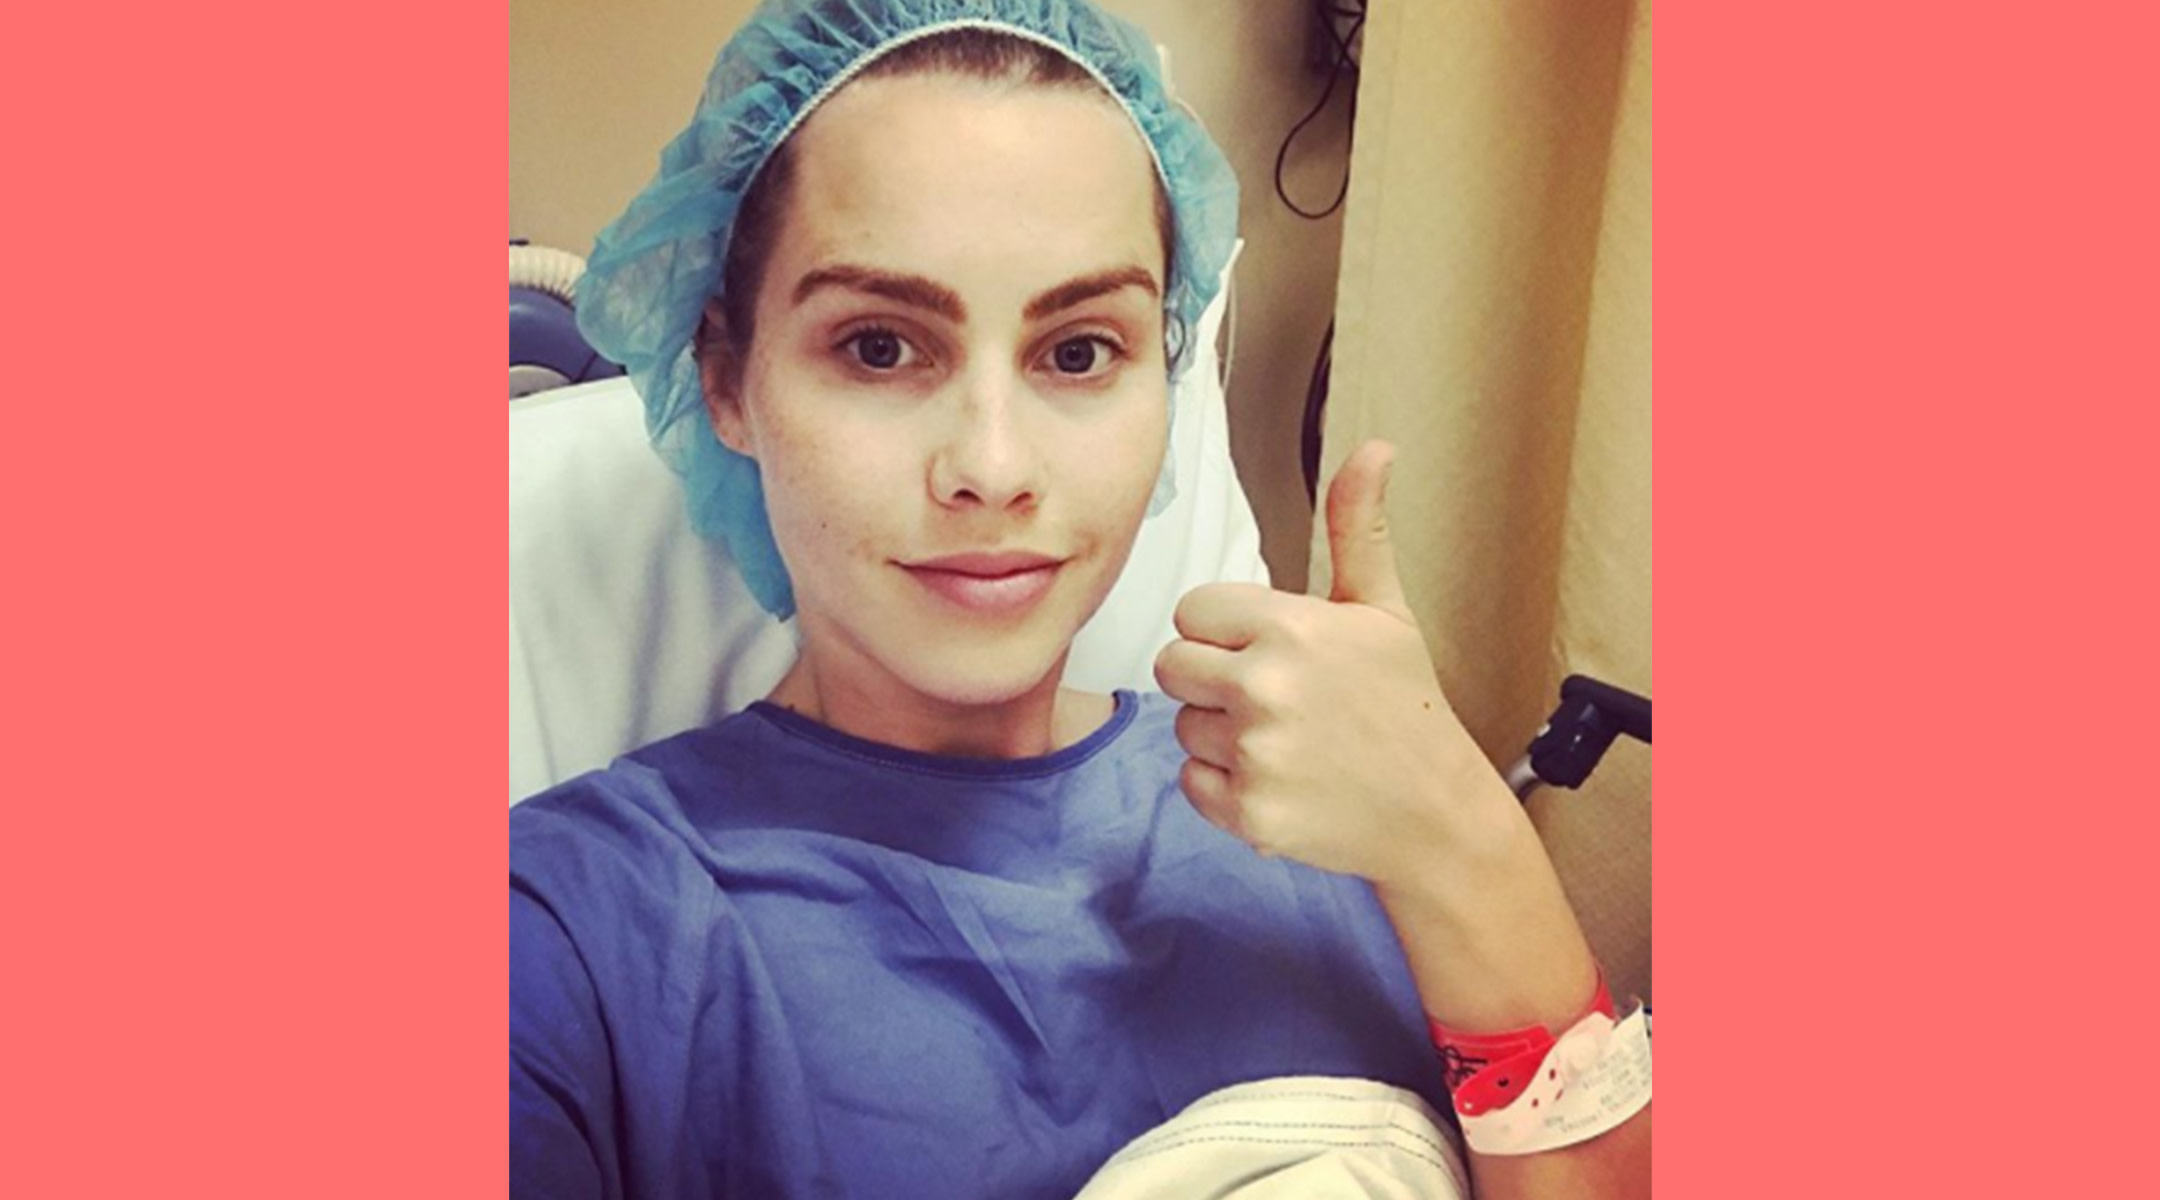 Claire Holt in hospital garb giving thumbs up